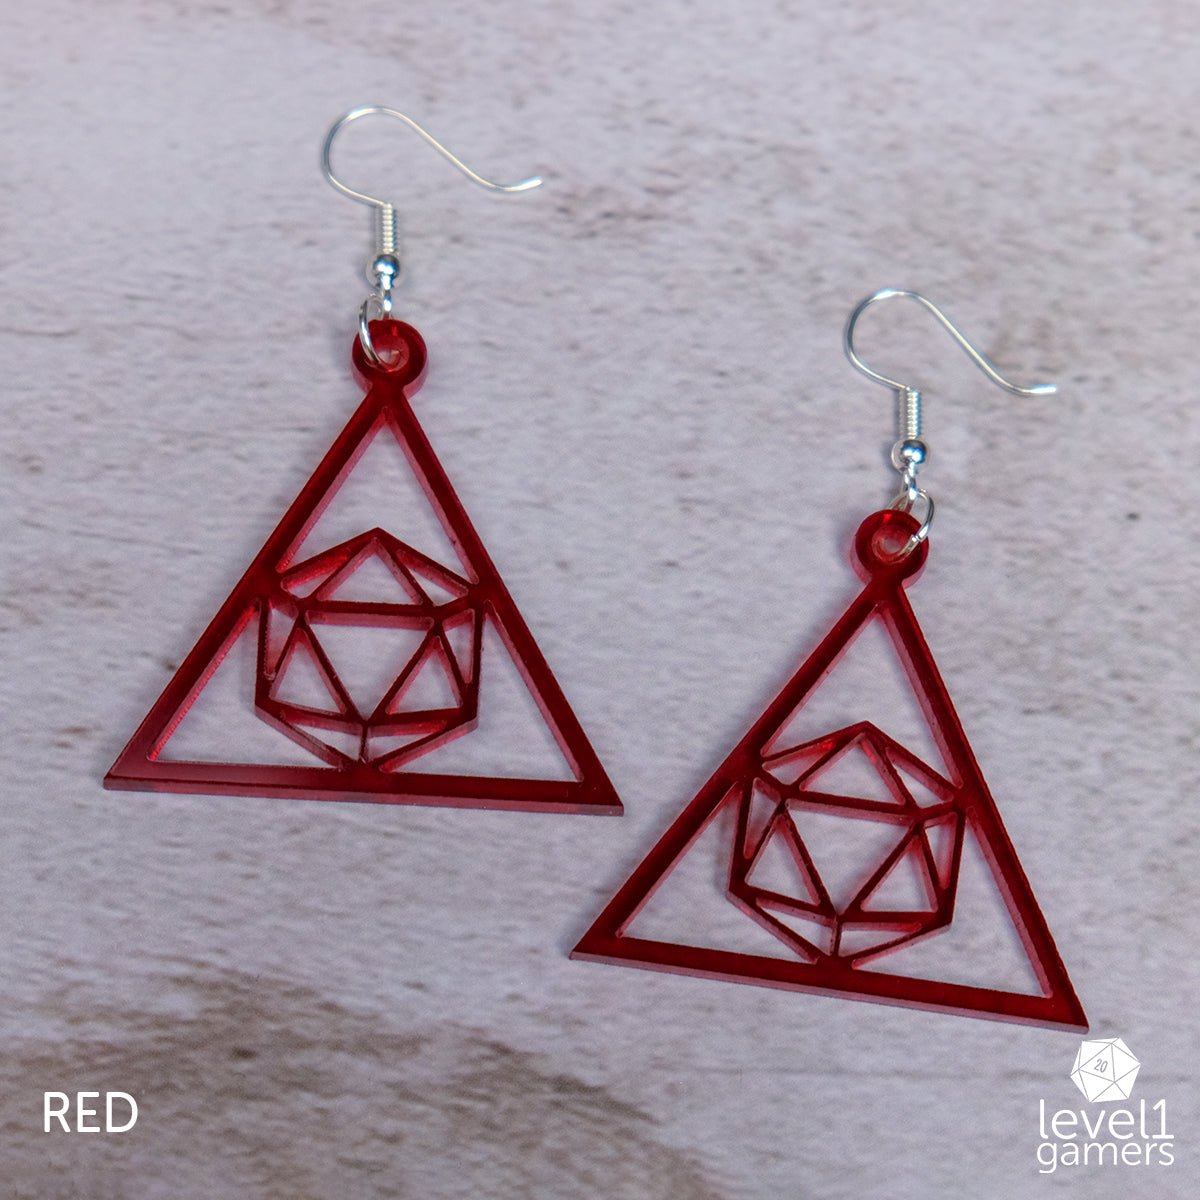 D20 Triangle Acrylic Earrings  Level 1 Gamers Pendant Red 